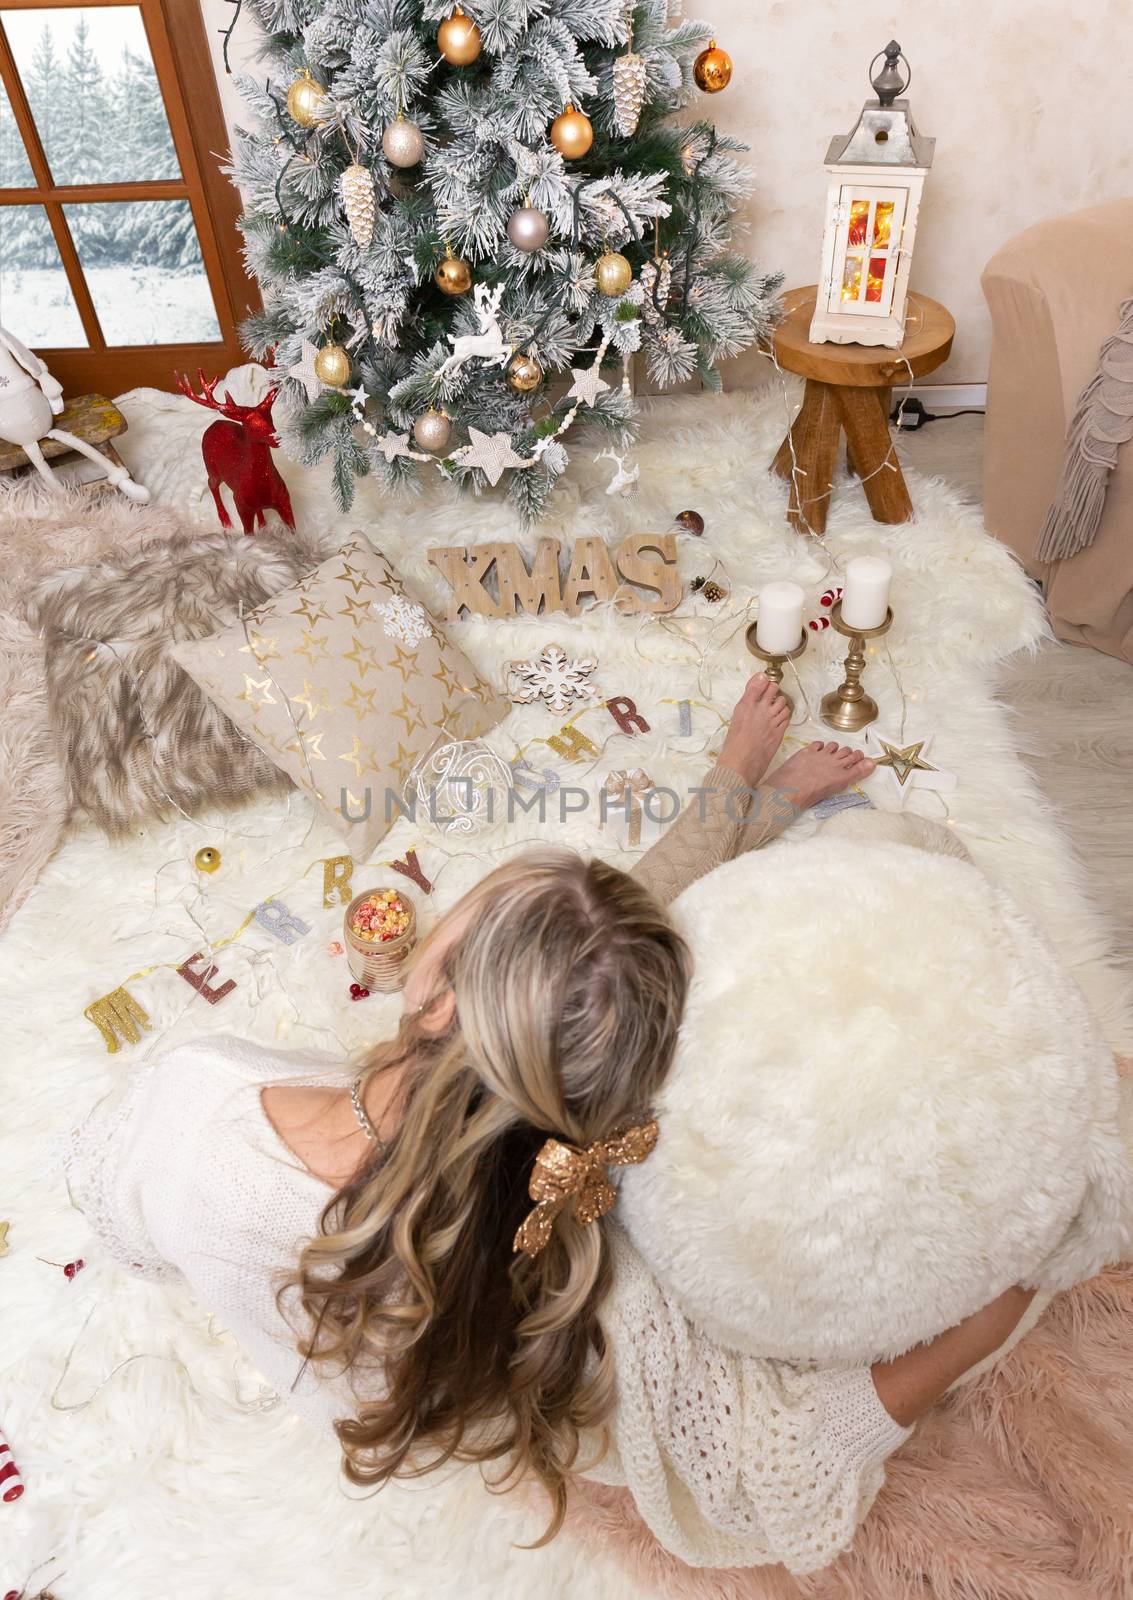 Cozy Christmas in front of the Christmas tree by lovleah